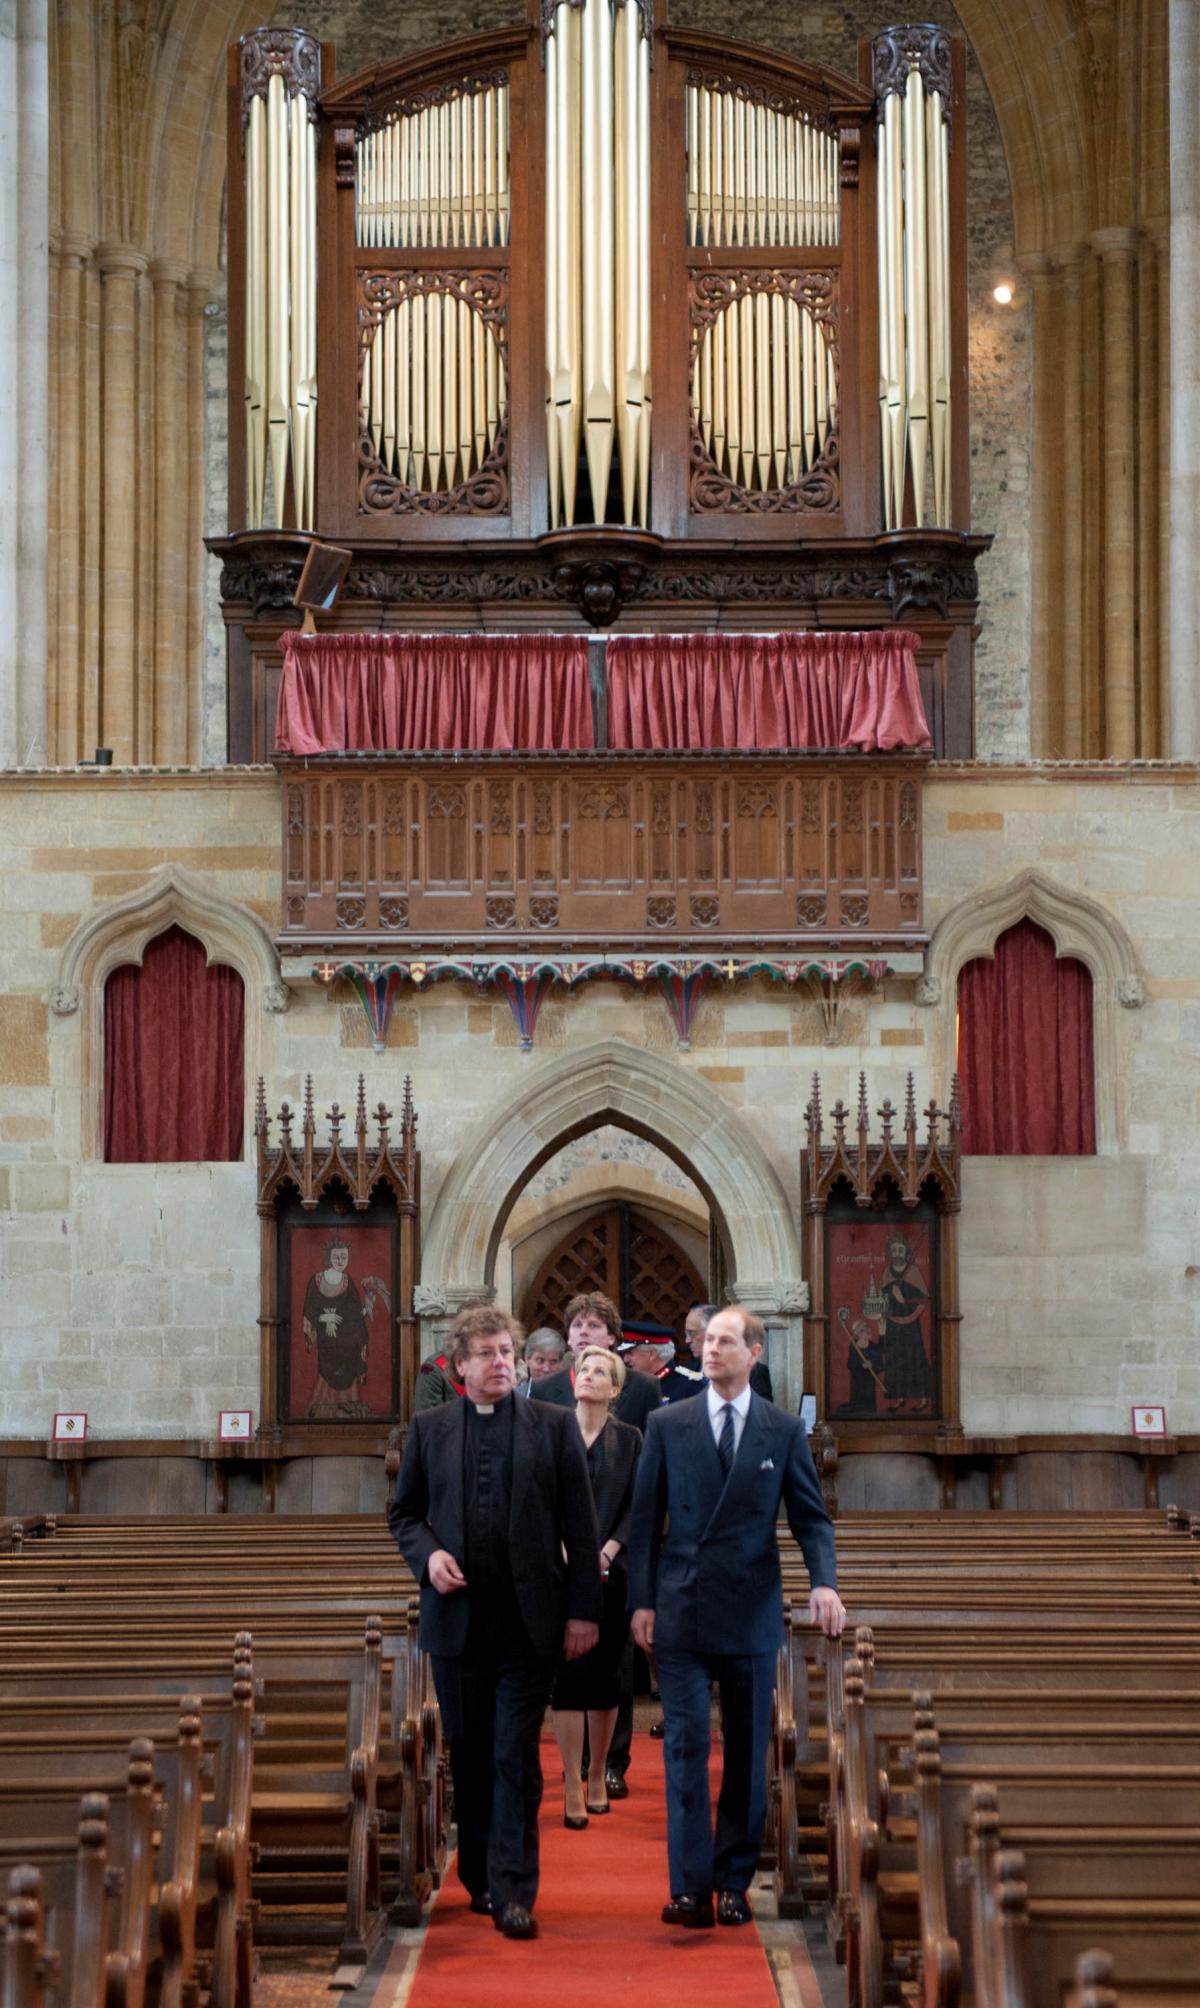 The Earl and Countess of Wessex visit Milton Abbey. Picture by Daniel Rushall.